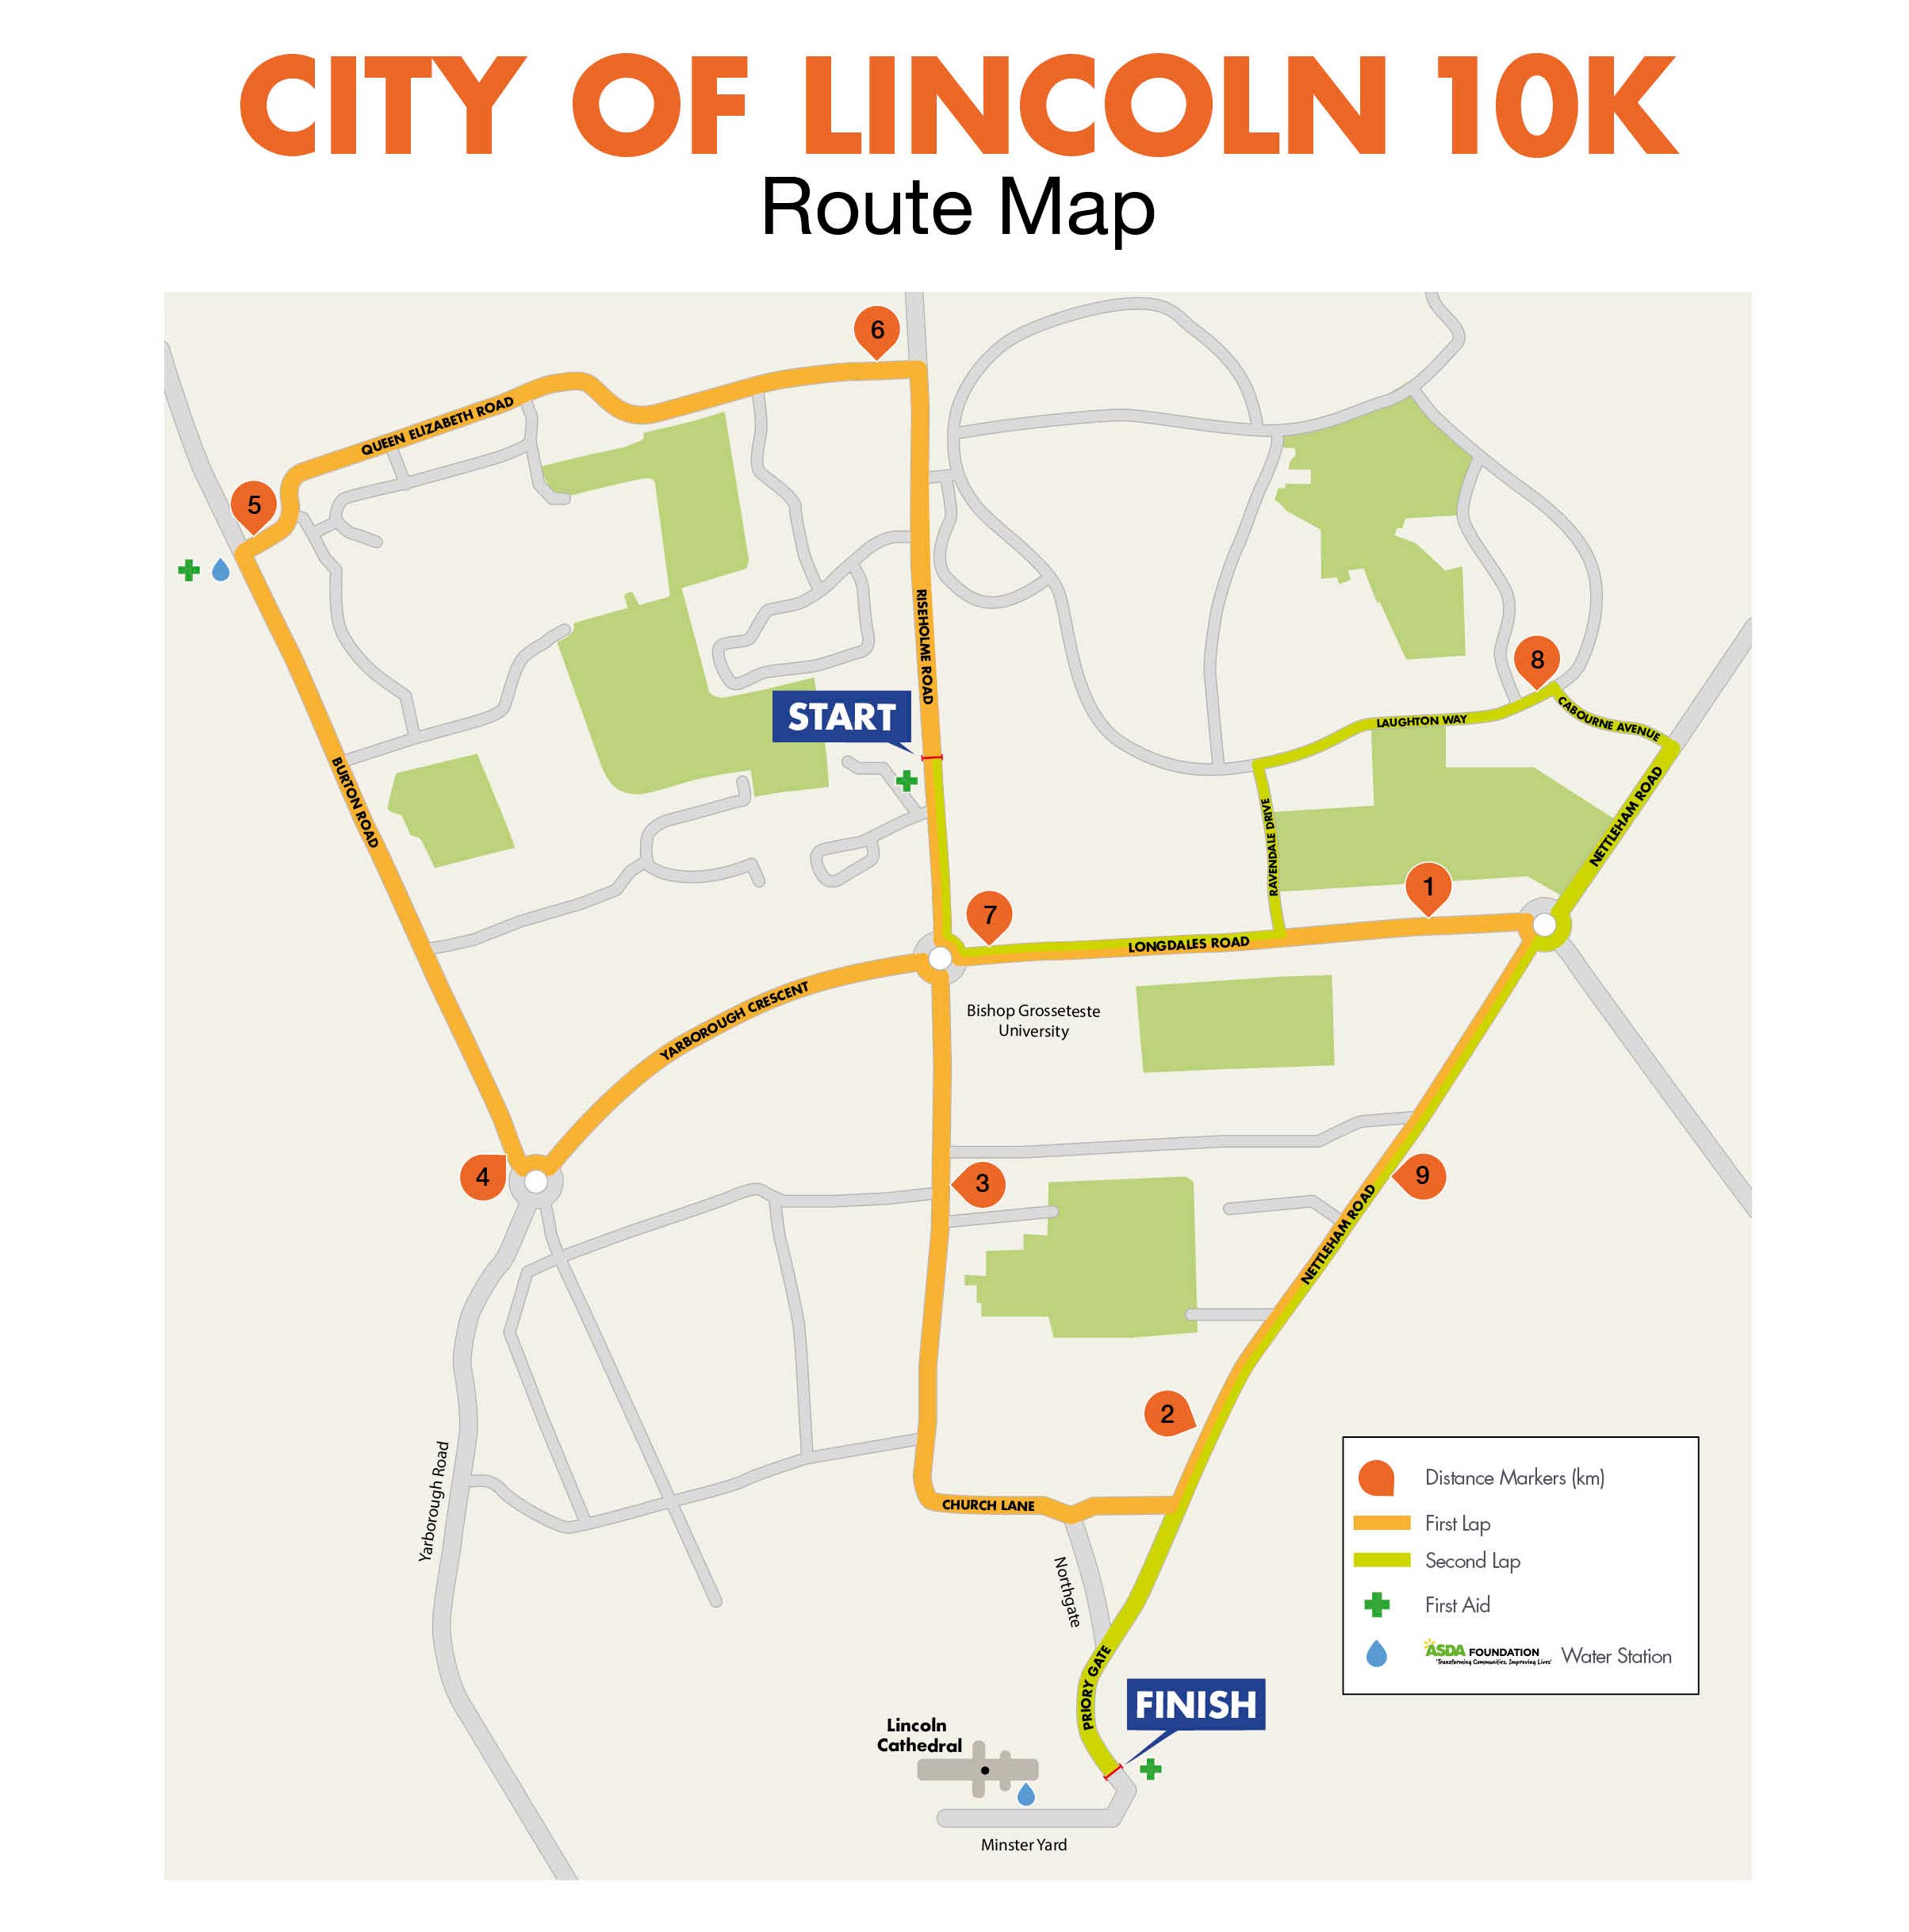 The Lincoln 10K course finishes at Lincoln Cathedral